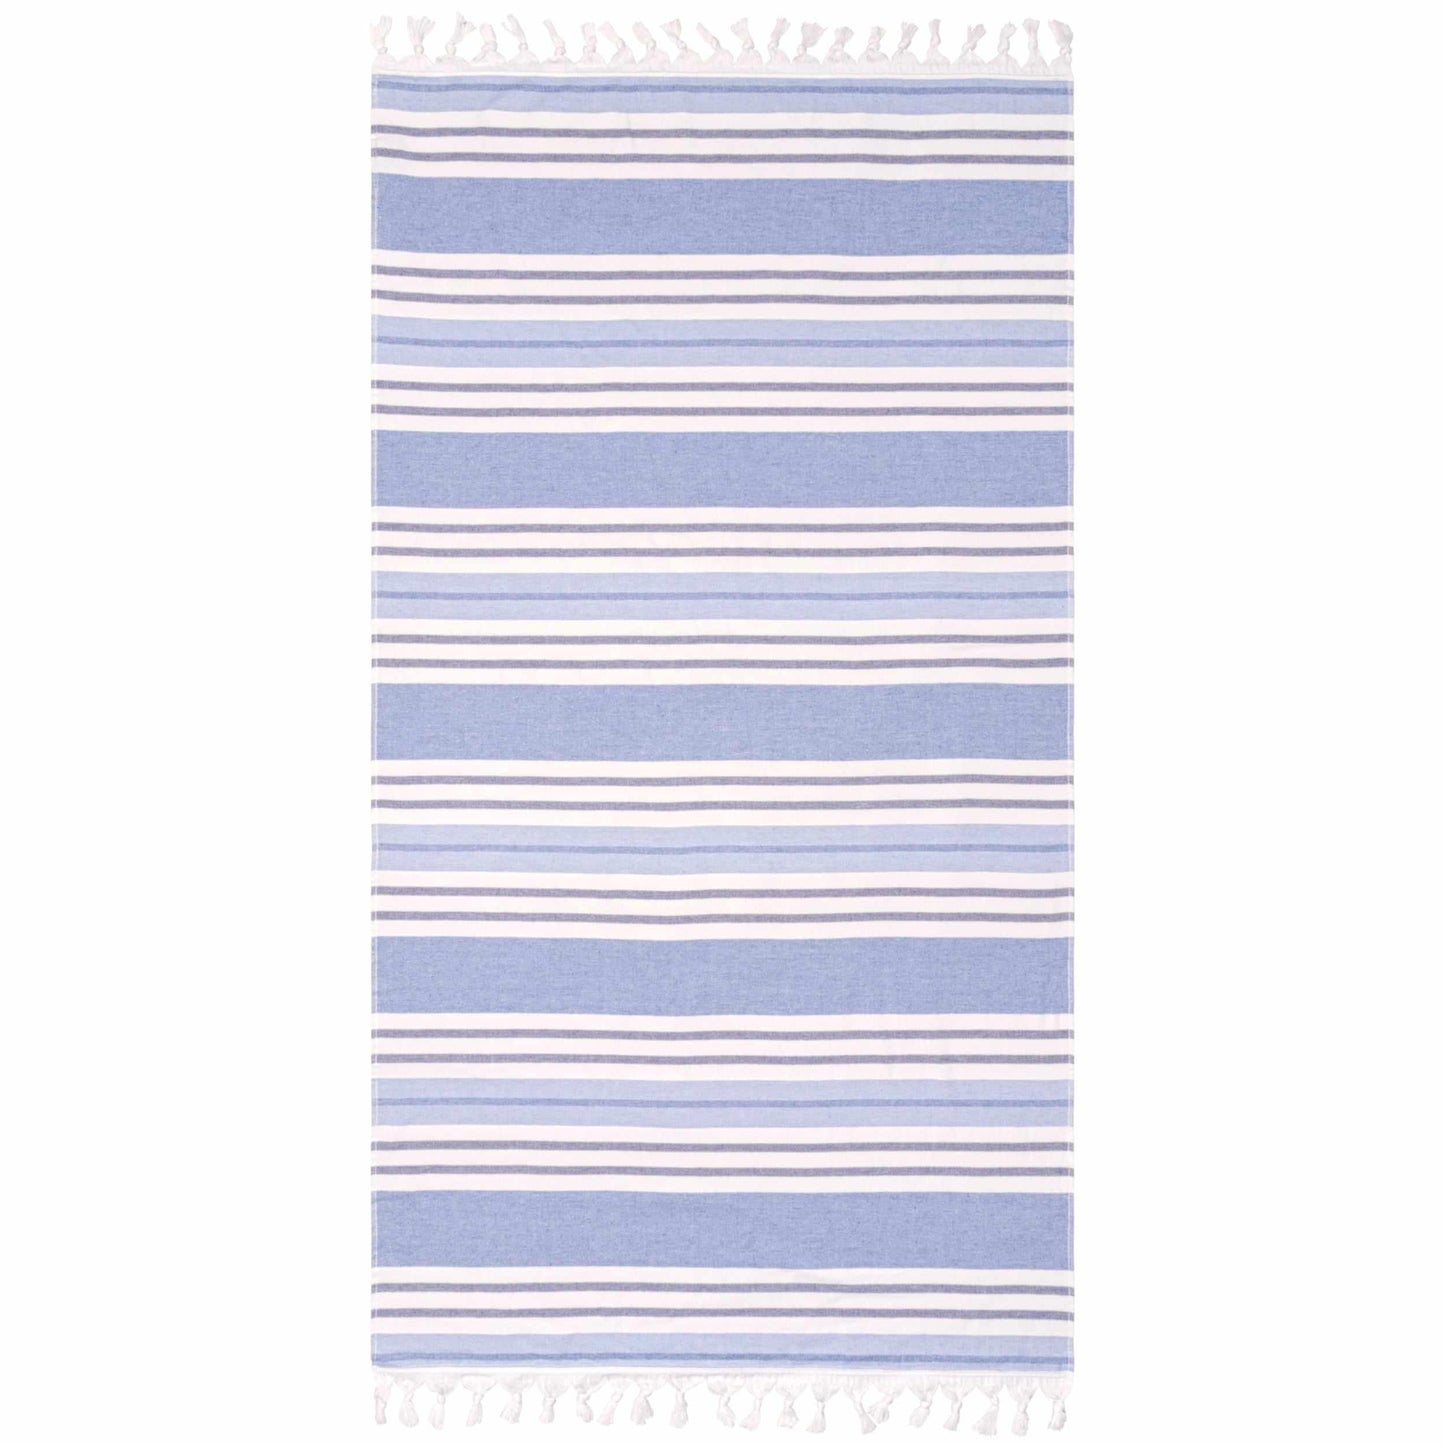 100% Cotton Fouta Beach Towel, Meera Stripes with Fringes FredCo